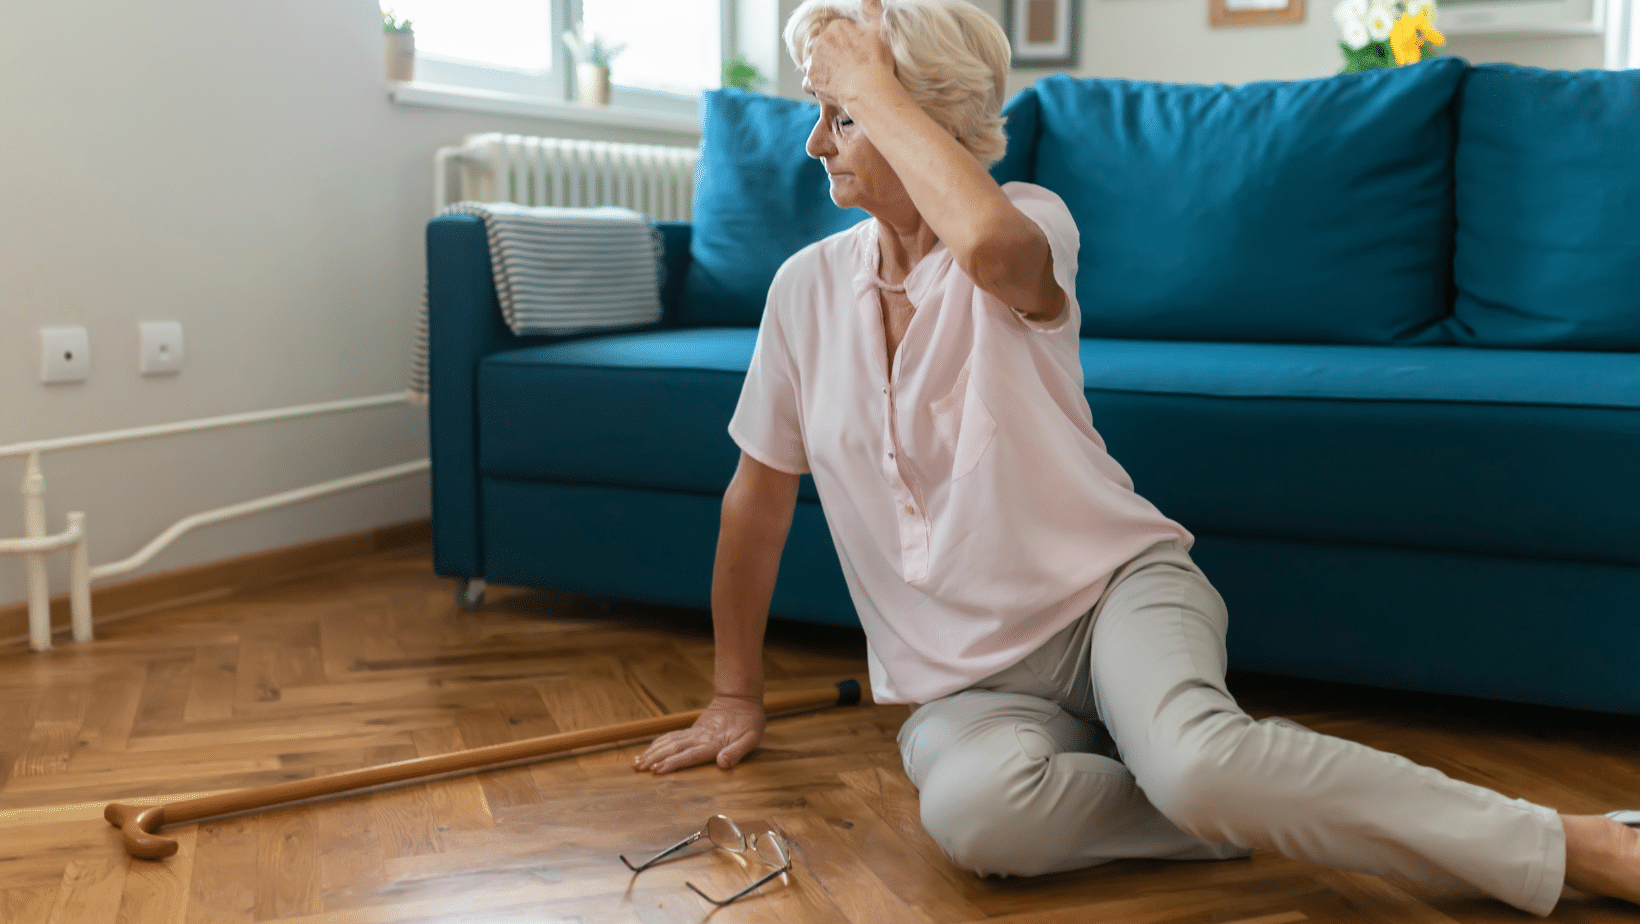 Female senior on the floor scratching head after falling